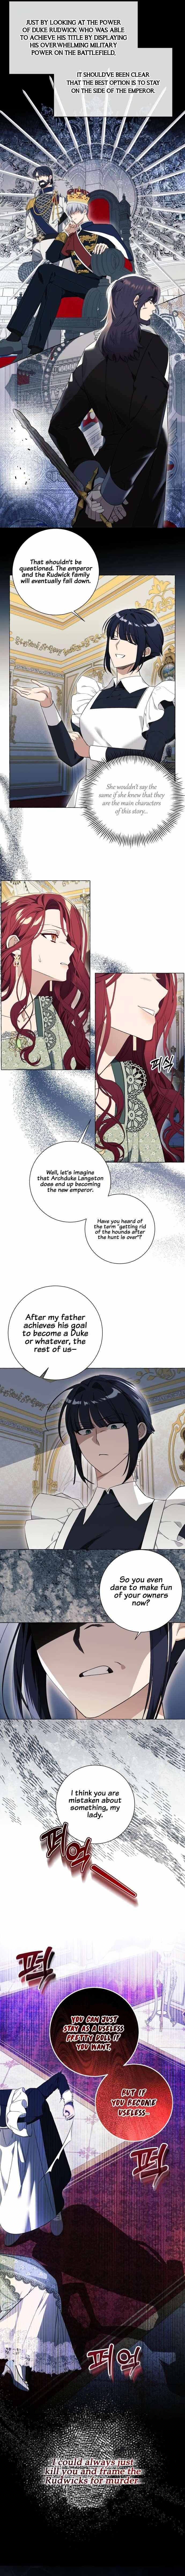 I Thought It Was A Common Isekai Story - 26 page 5-83fe2681